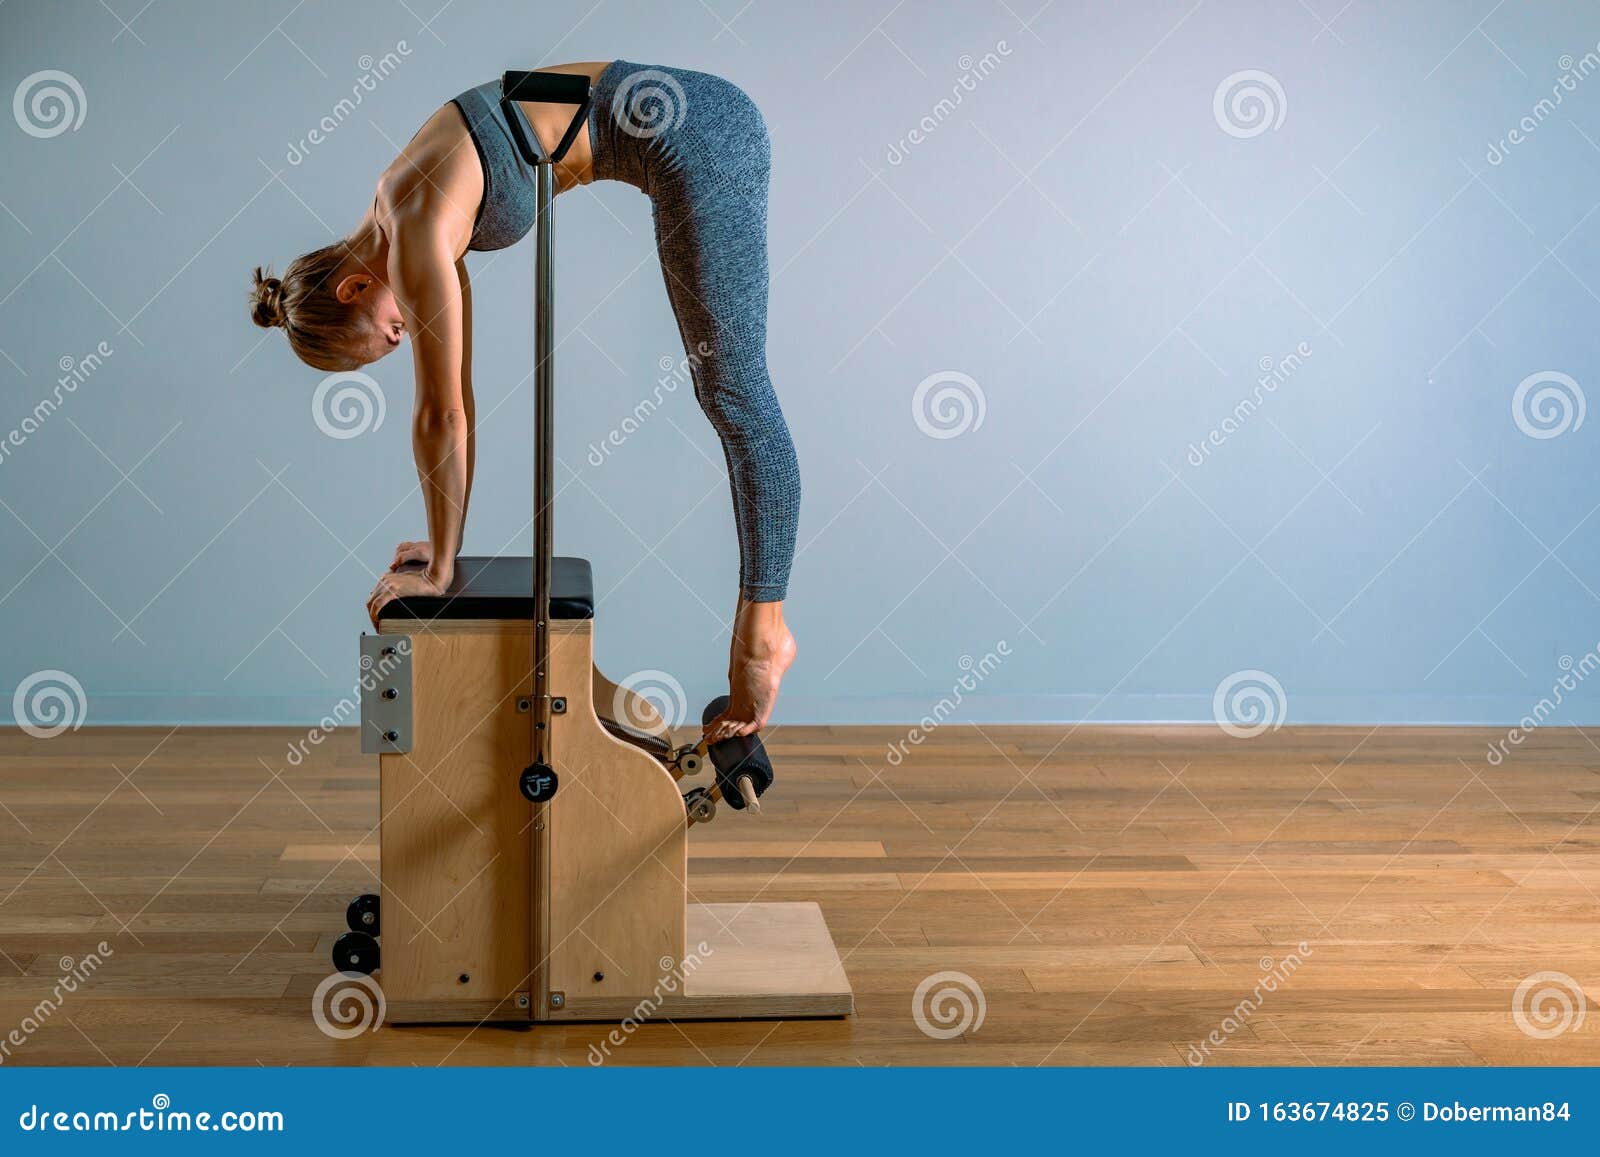 Pilates Woman in a Cadillac Reformer Doing Stretching Exercises in the ...